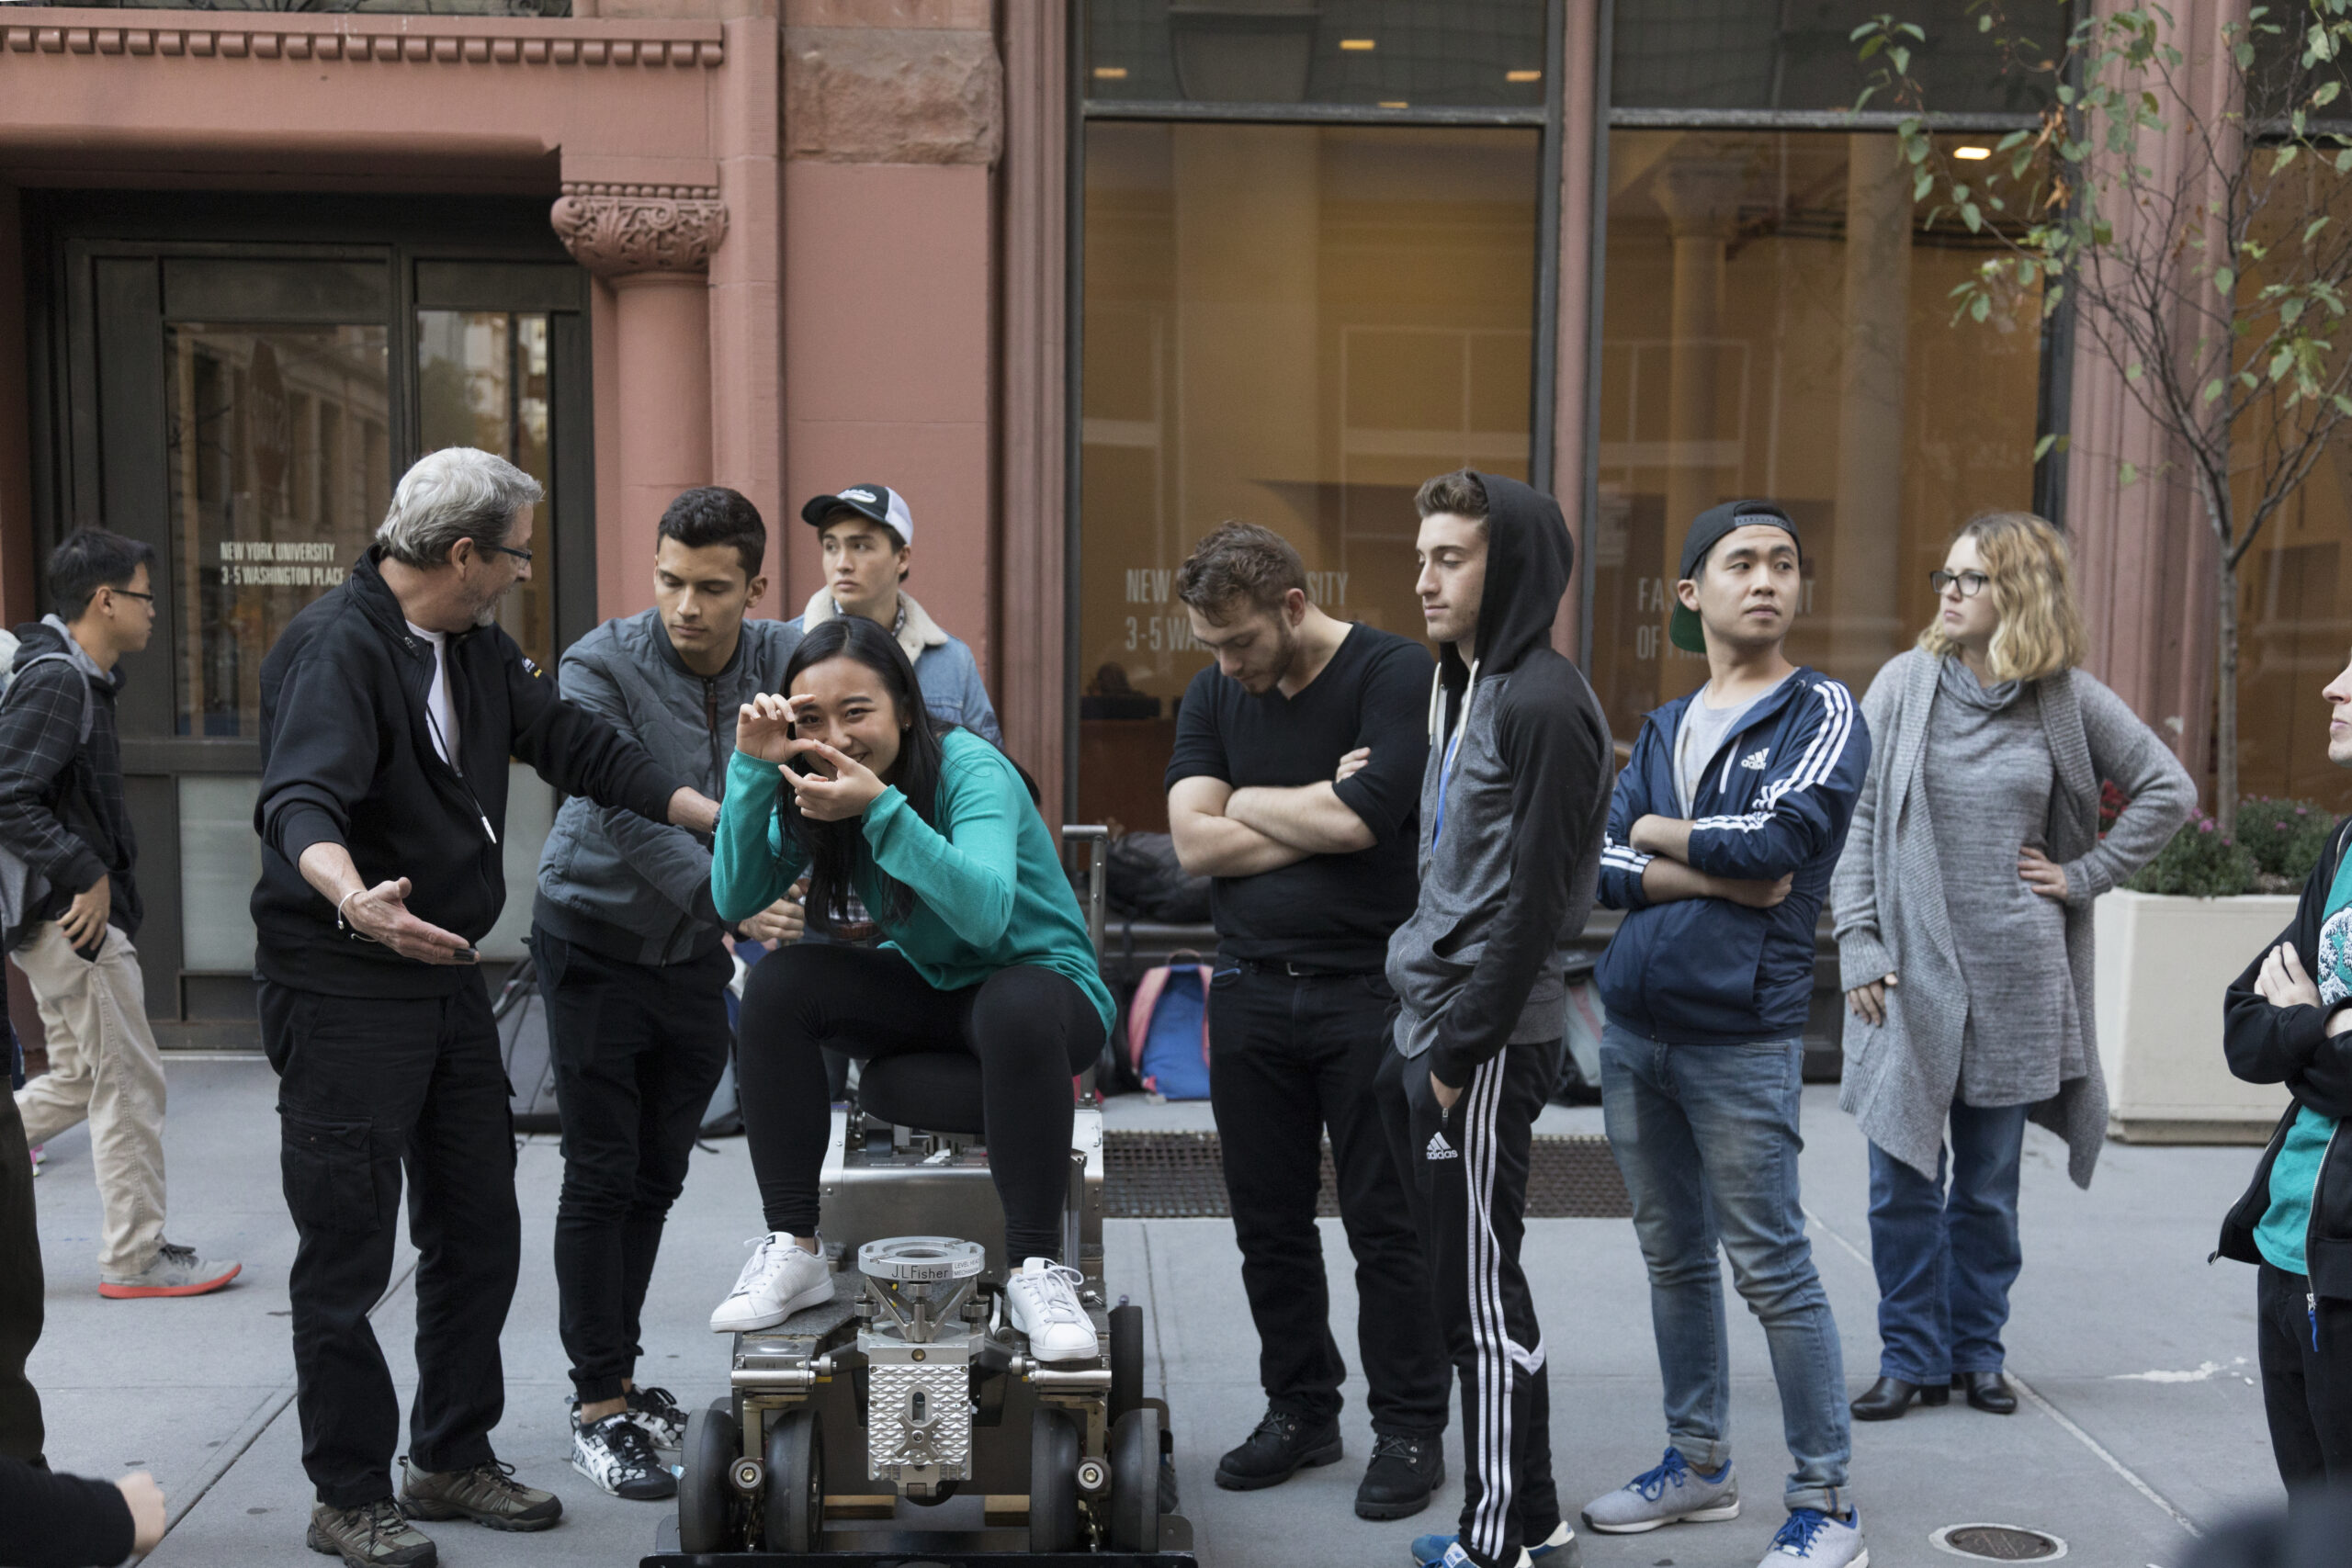 Students, with their professor’s guidance, trying out film equipment during a class outing.